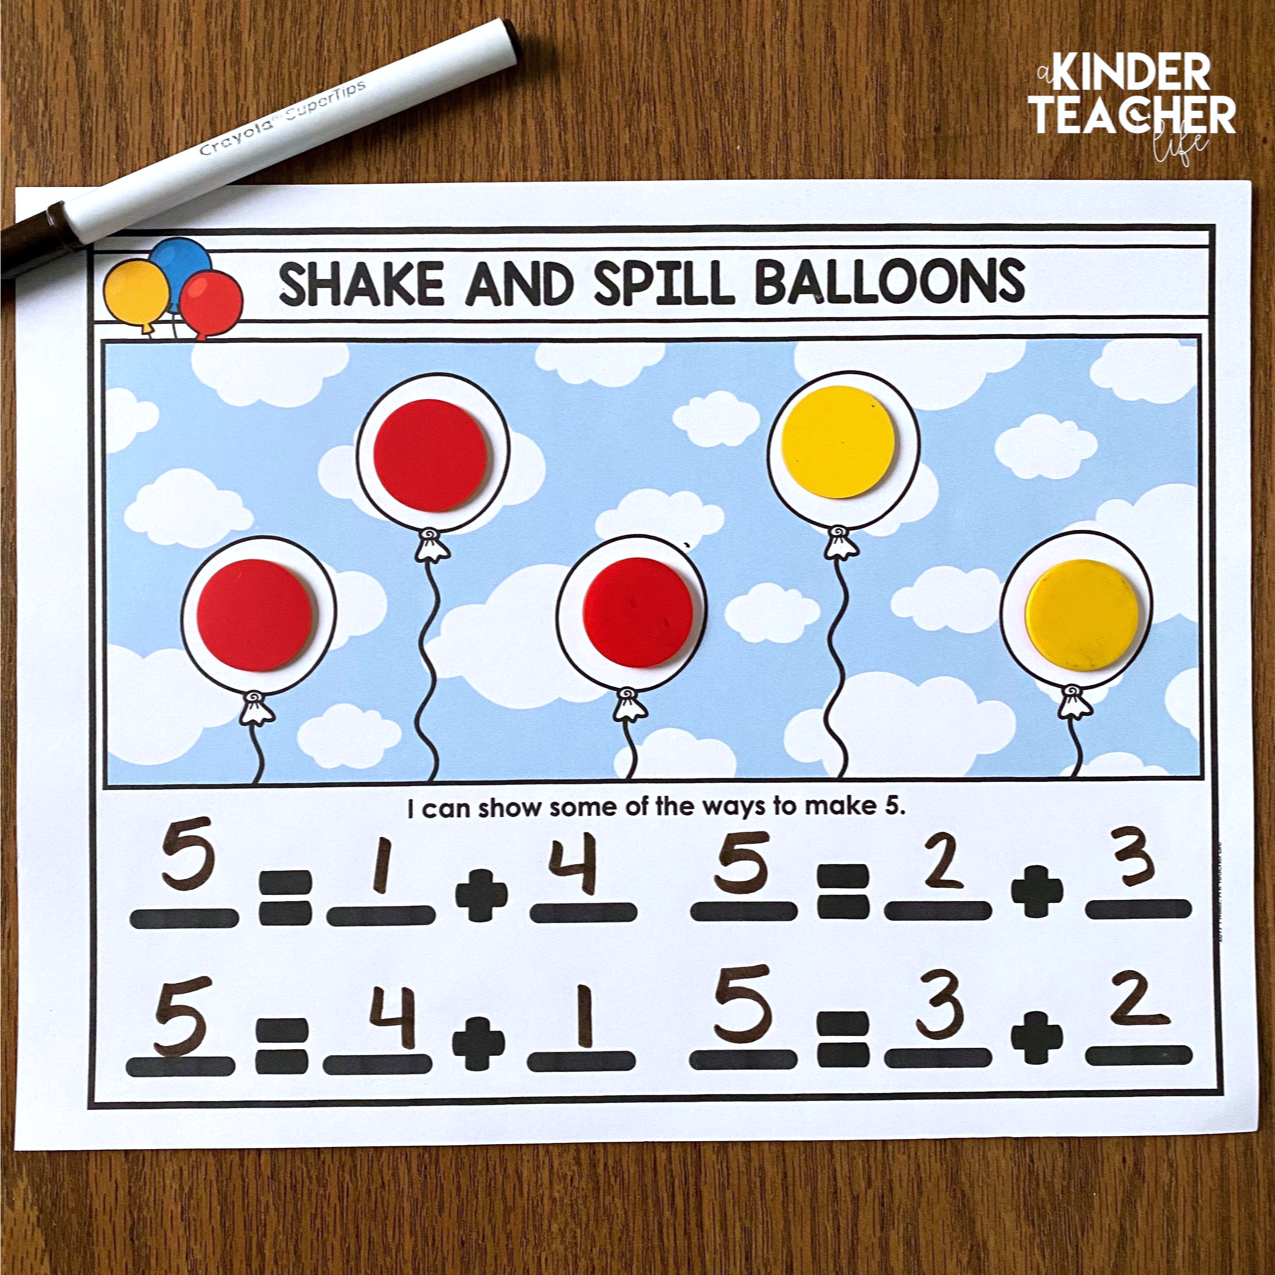 Shake and Spill Balloons - Read this article to learn how to teach decomposing using hands-on activities. 